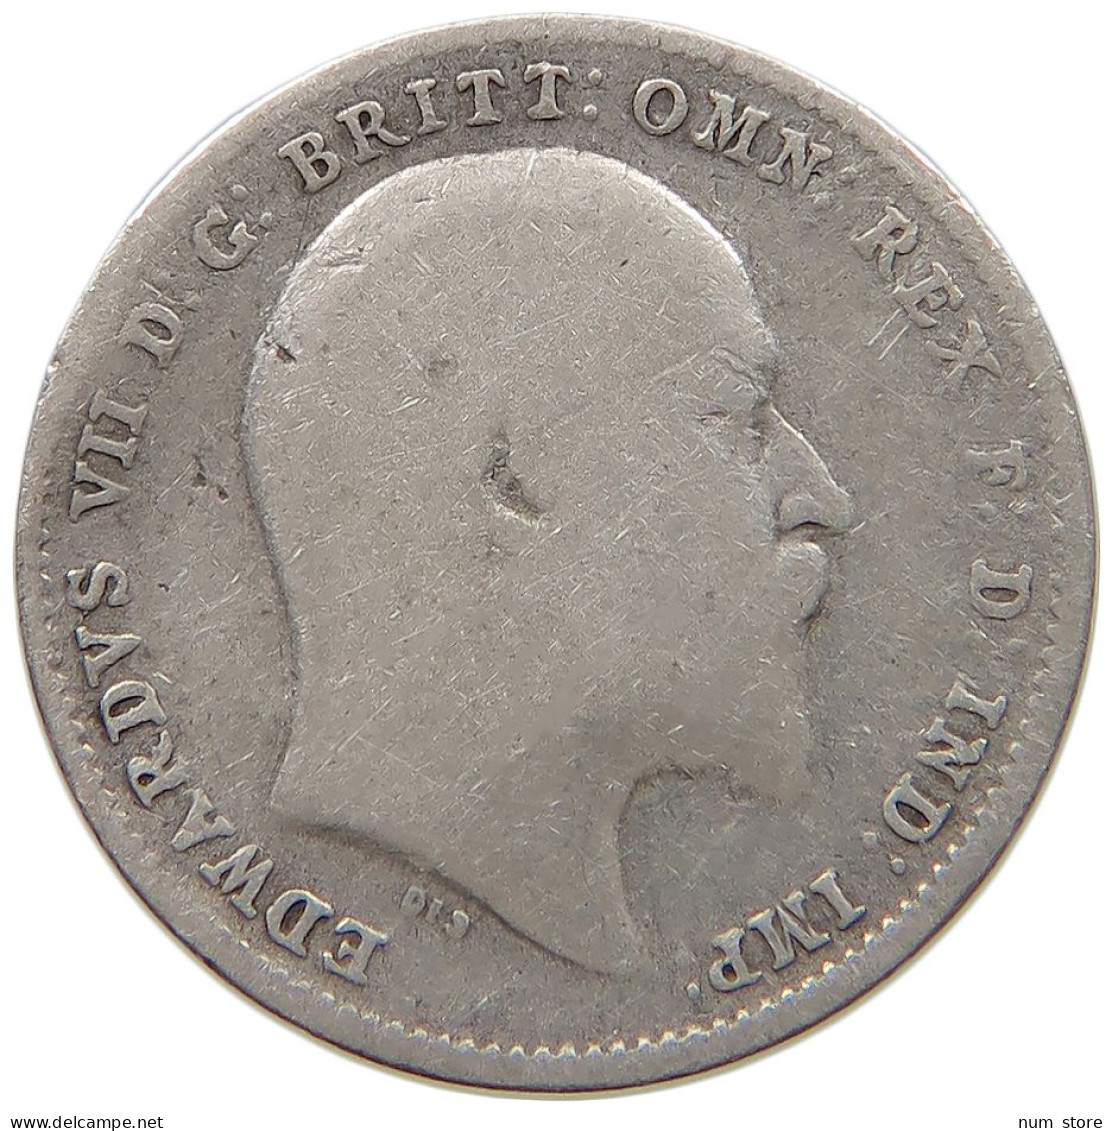 GREAT BRITAIN THREEPENCE 1910 #s059 0637 - F. 3 Pence